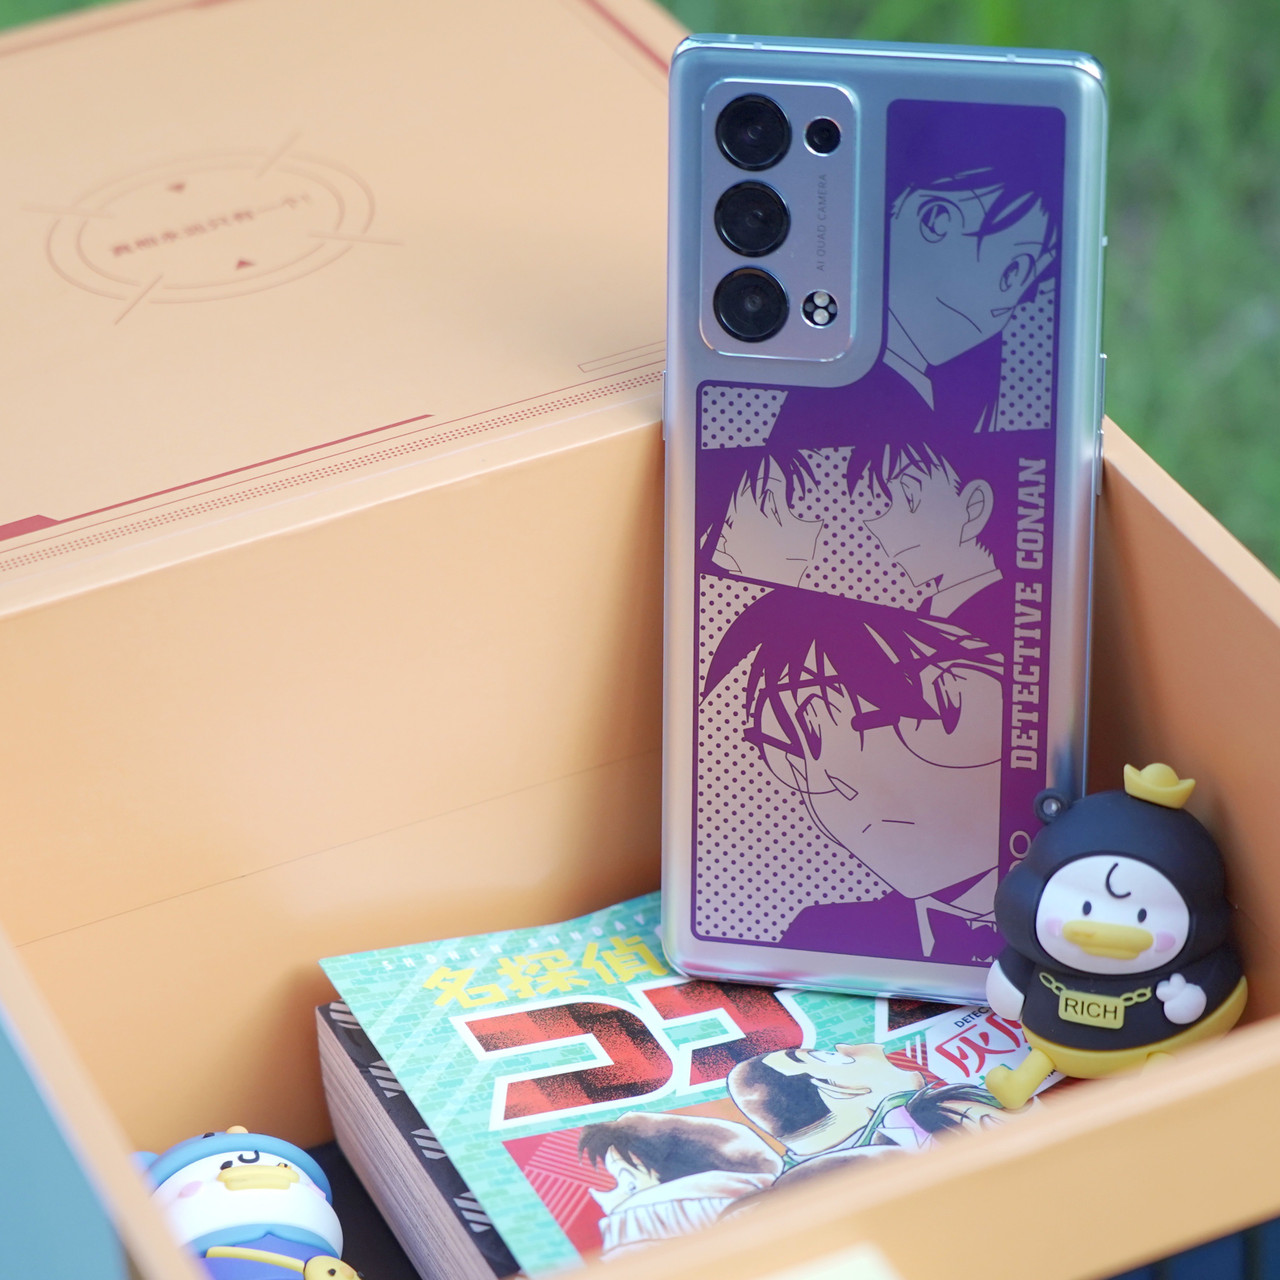 OPPO Watch x Detective Conan (Case Closed) Limited Edition Smartwatch